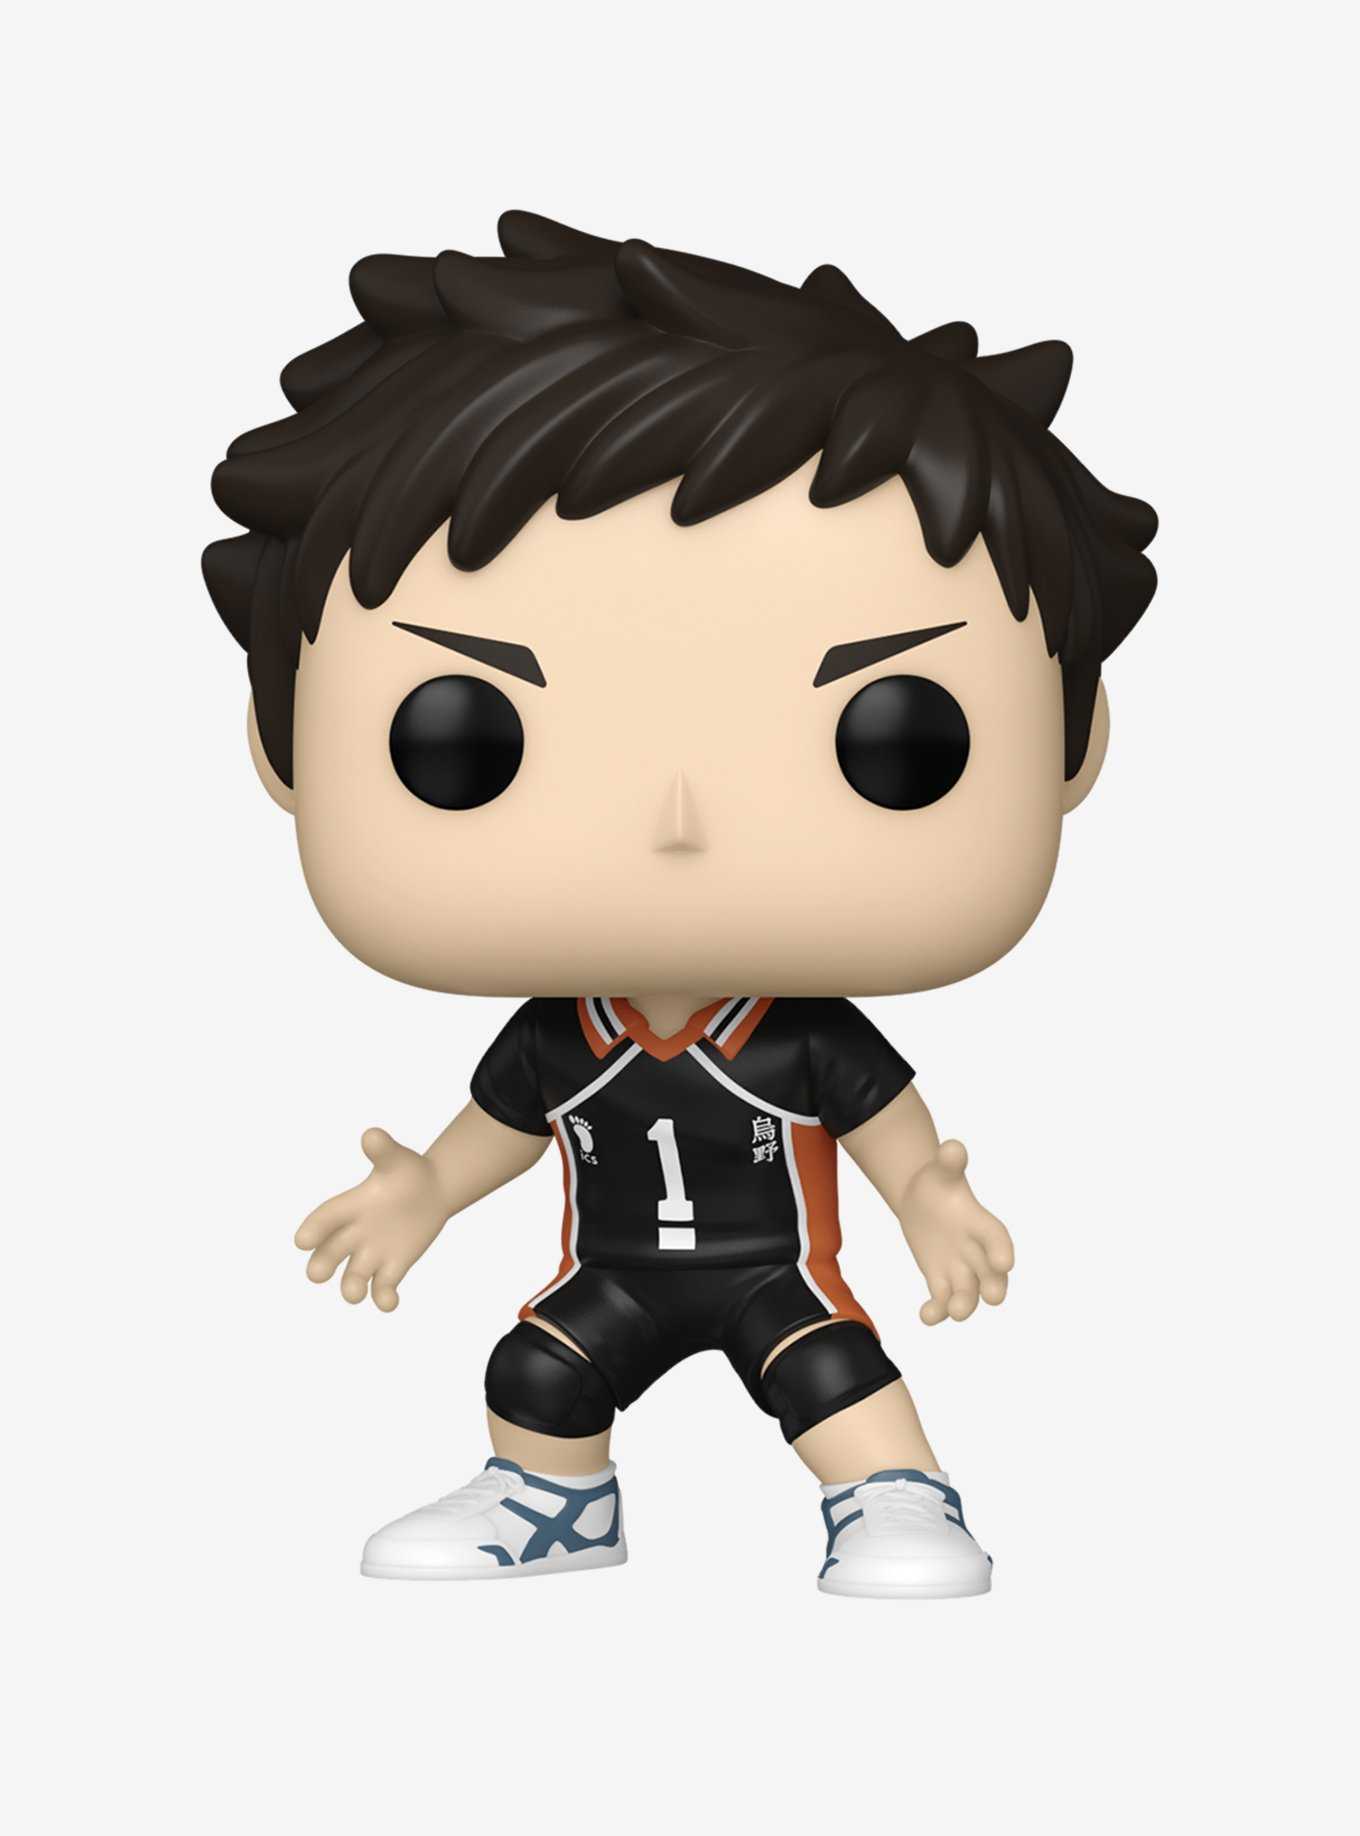 Haikyuu Wallet Gifts & Merchandise for Sale